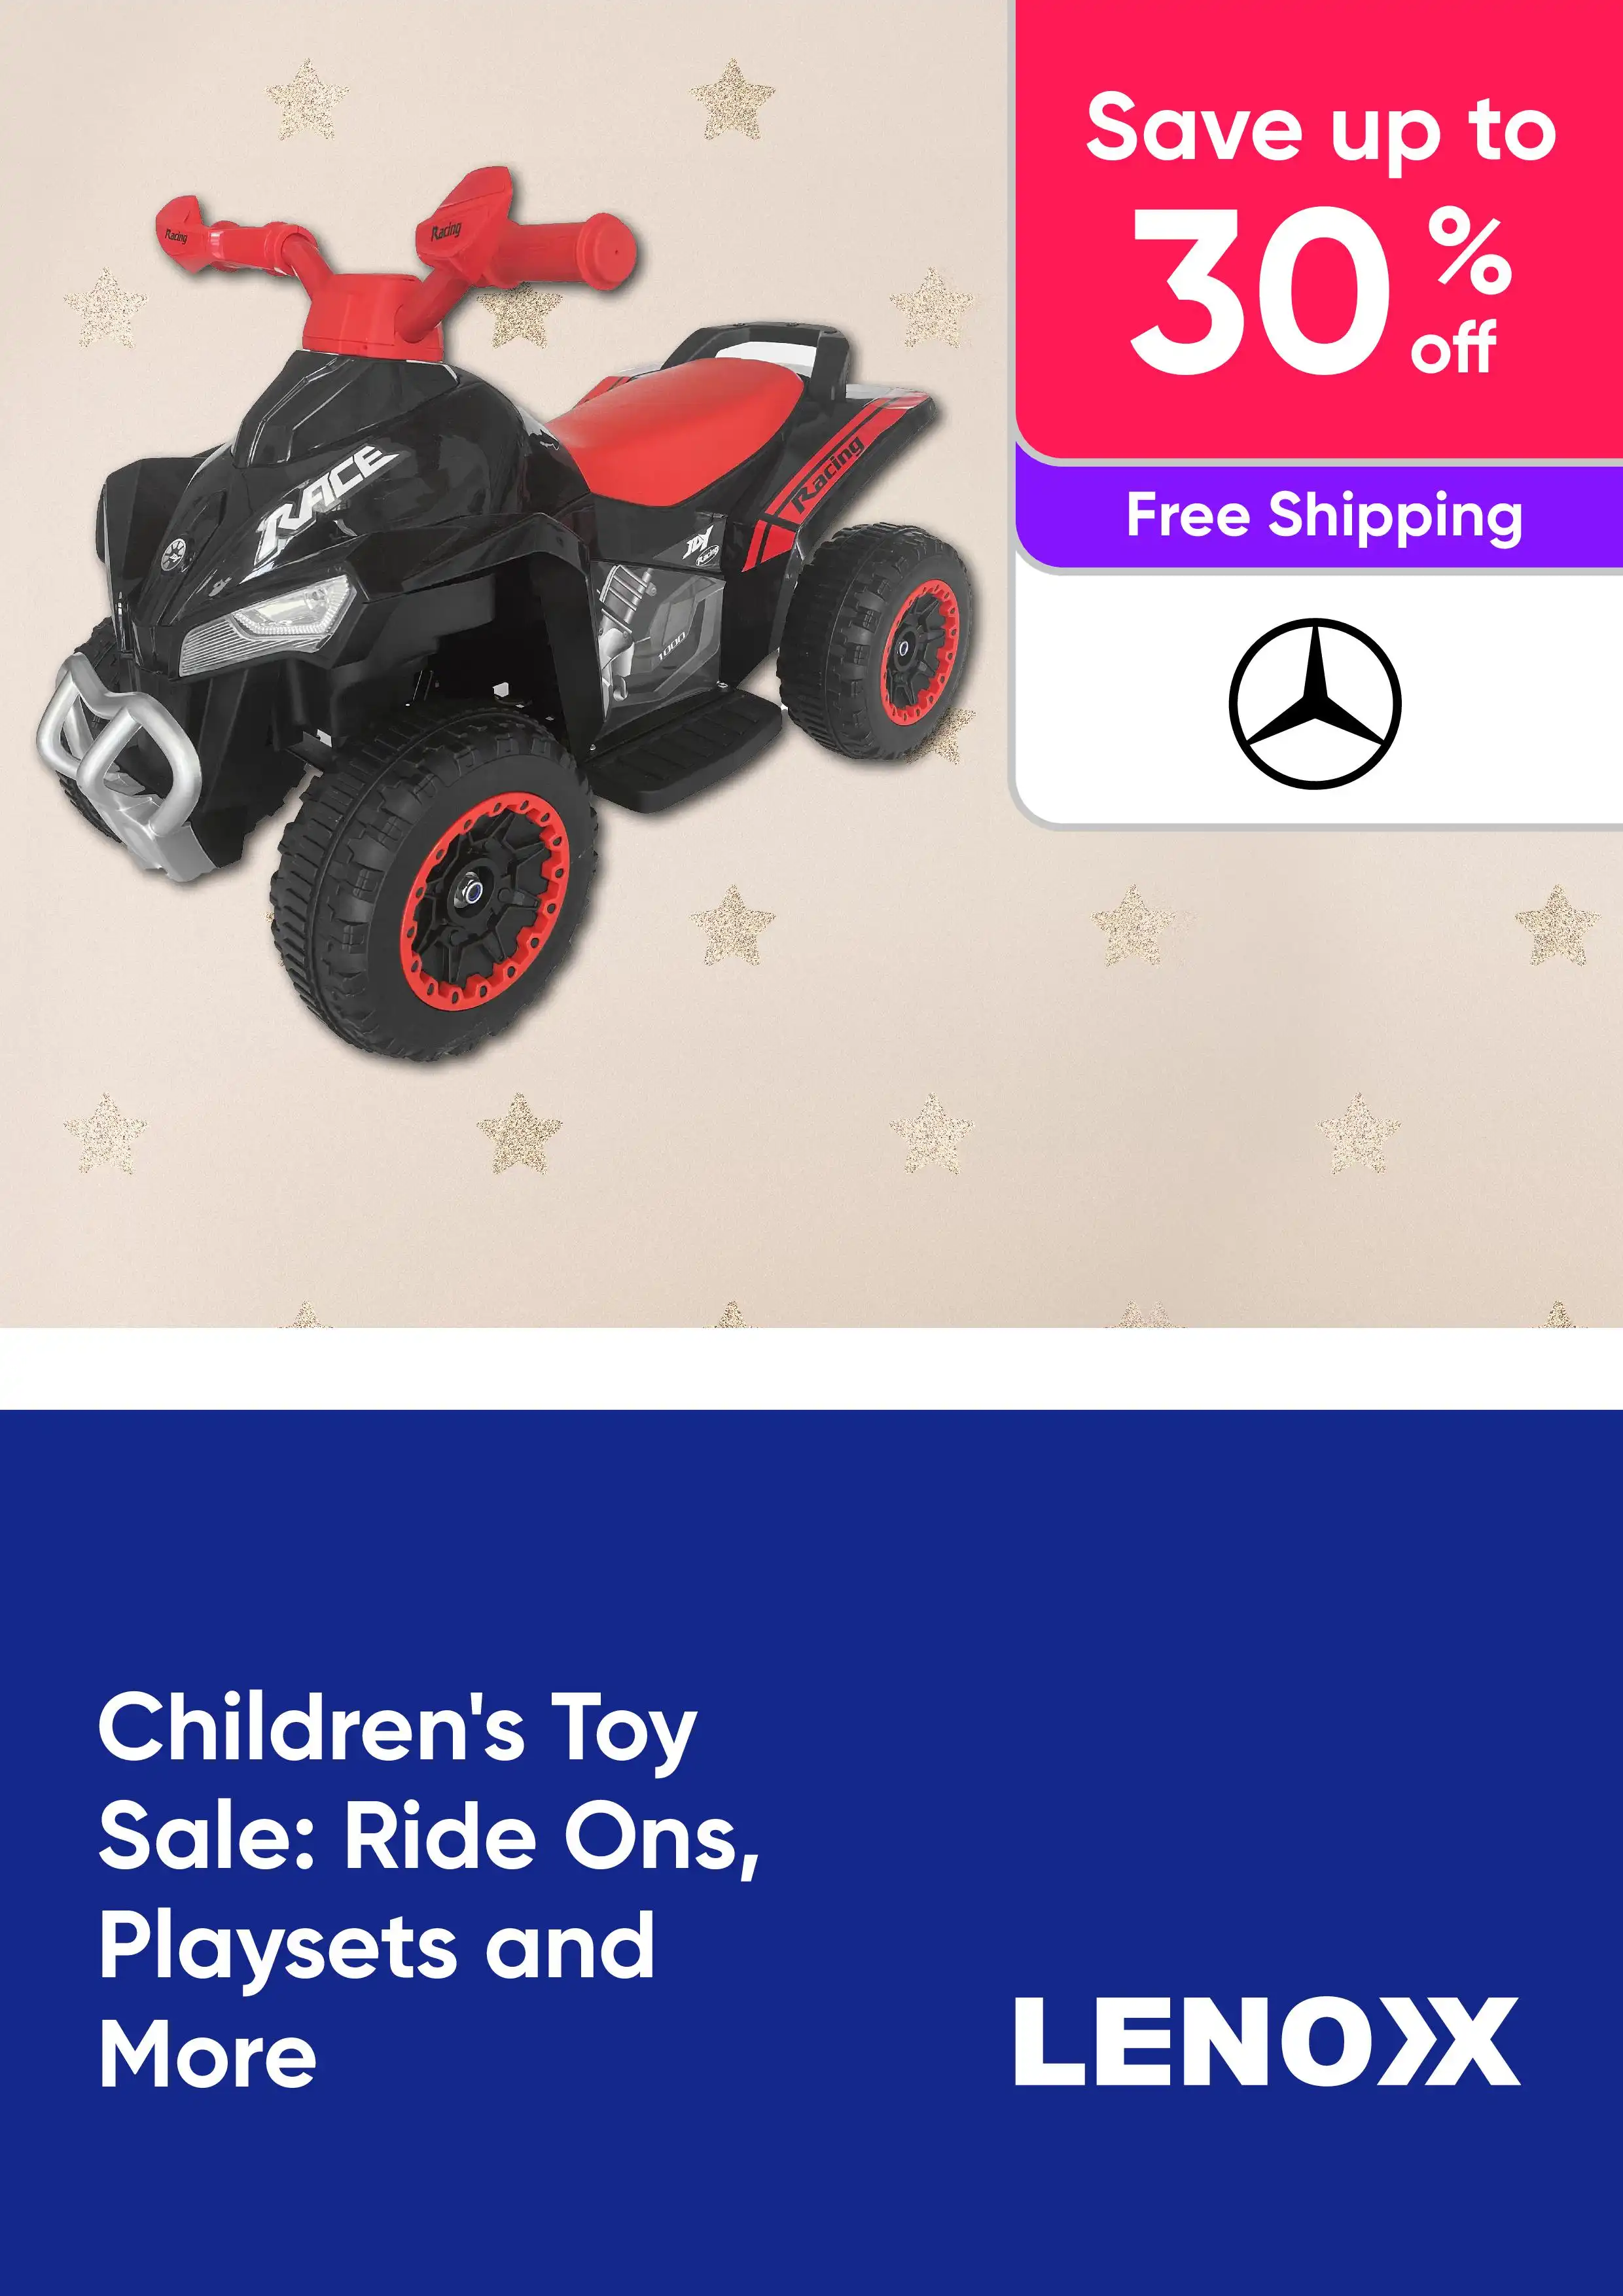 Children's Toy Sale - Ride Ons, Playsets and More - Mercedes Benz - up to 30% off